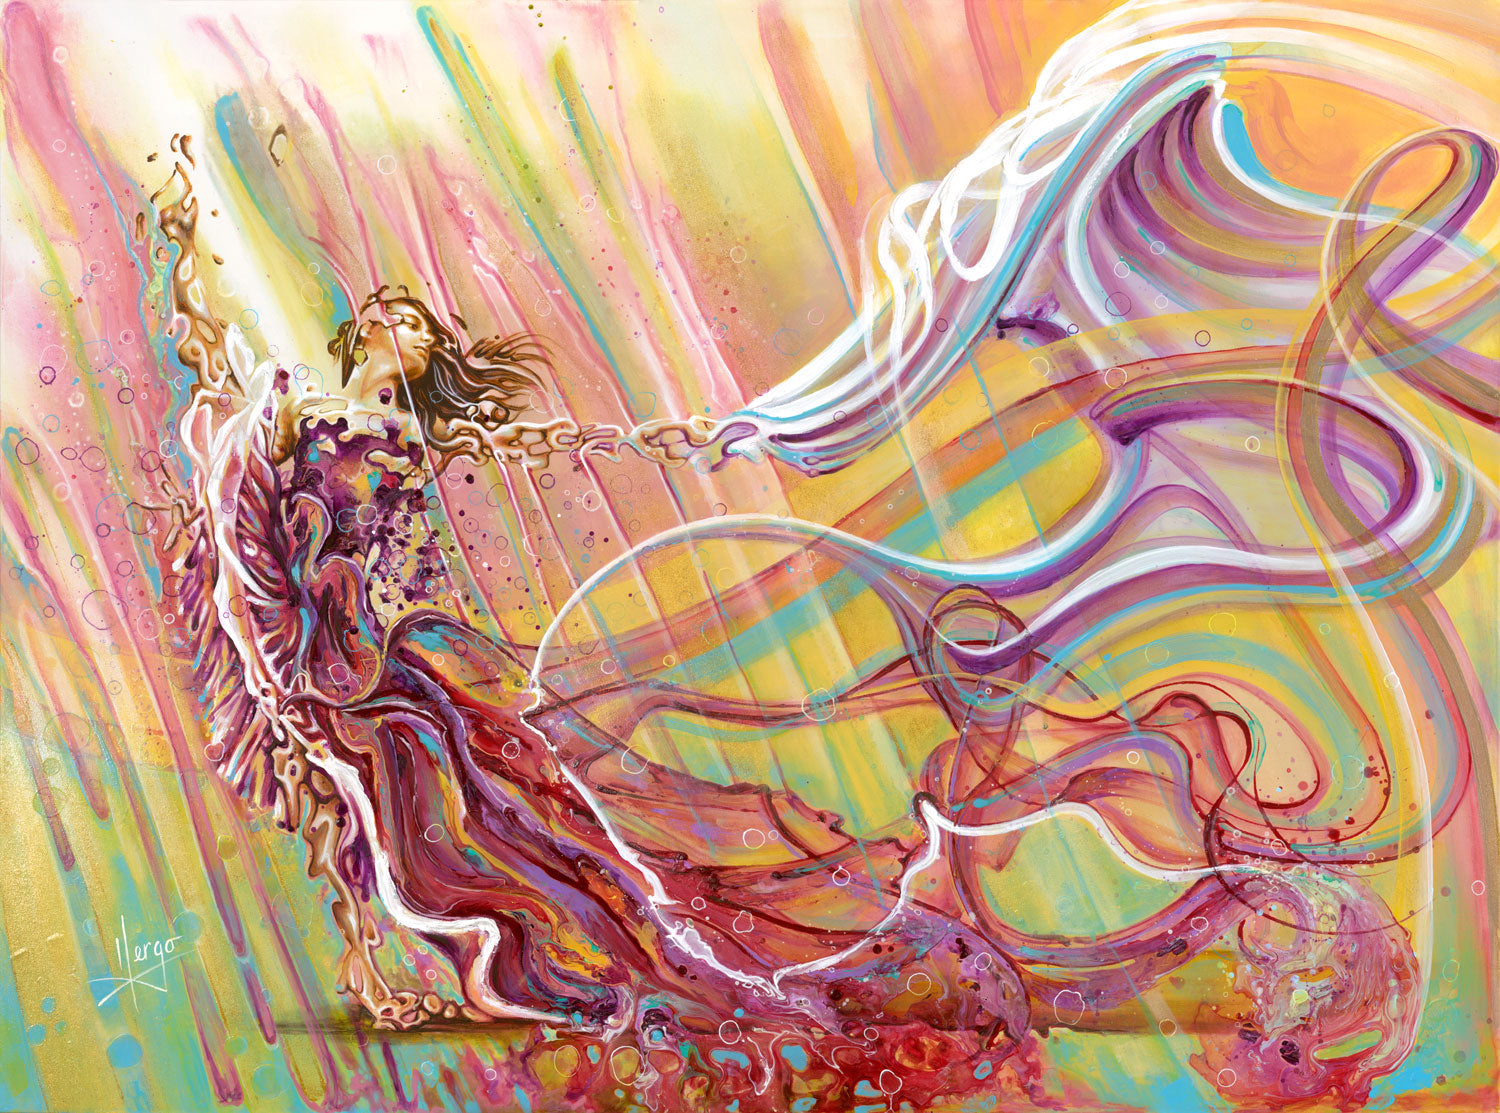 "follow your heart" woman dancer with colorful veil painting